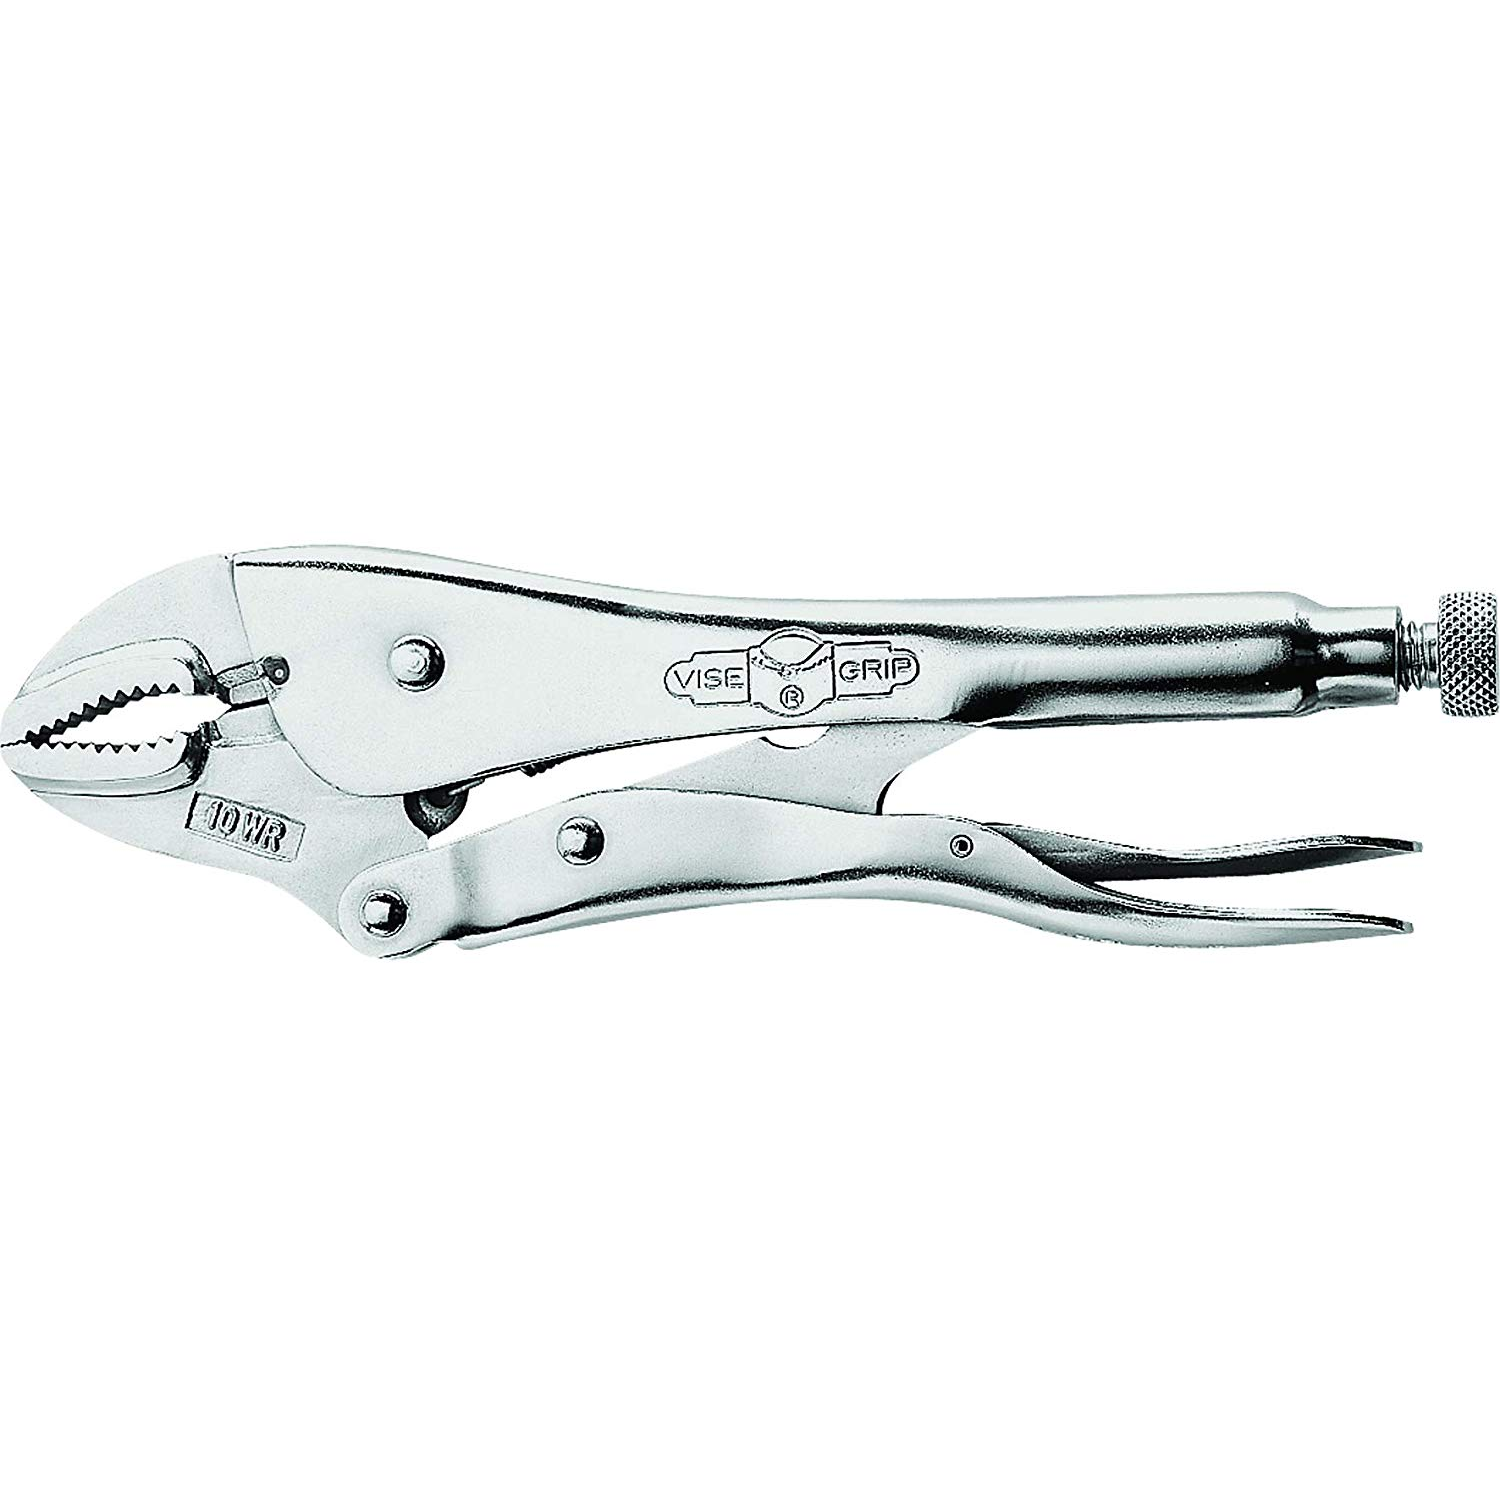 Irwin Vise-Grip 10" Curved Jaw Locking Plier - wise-line-tools